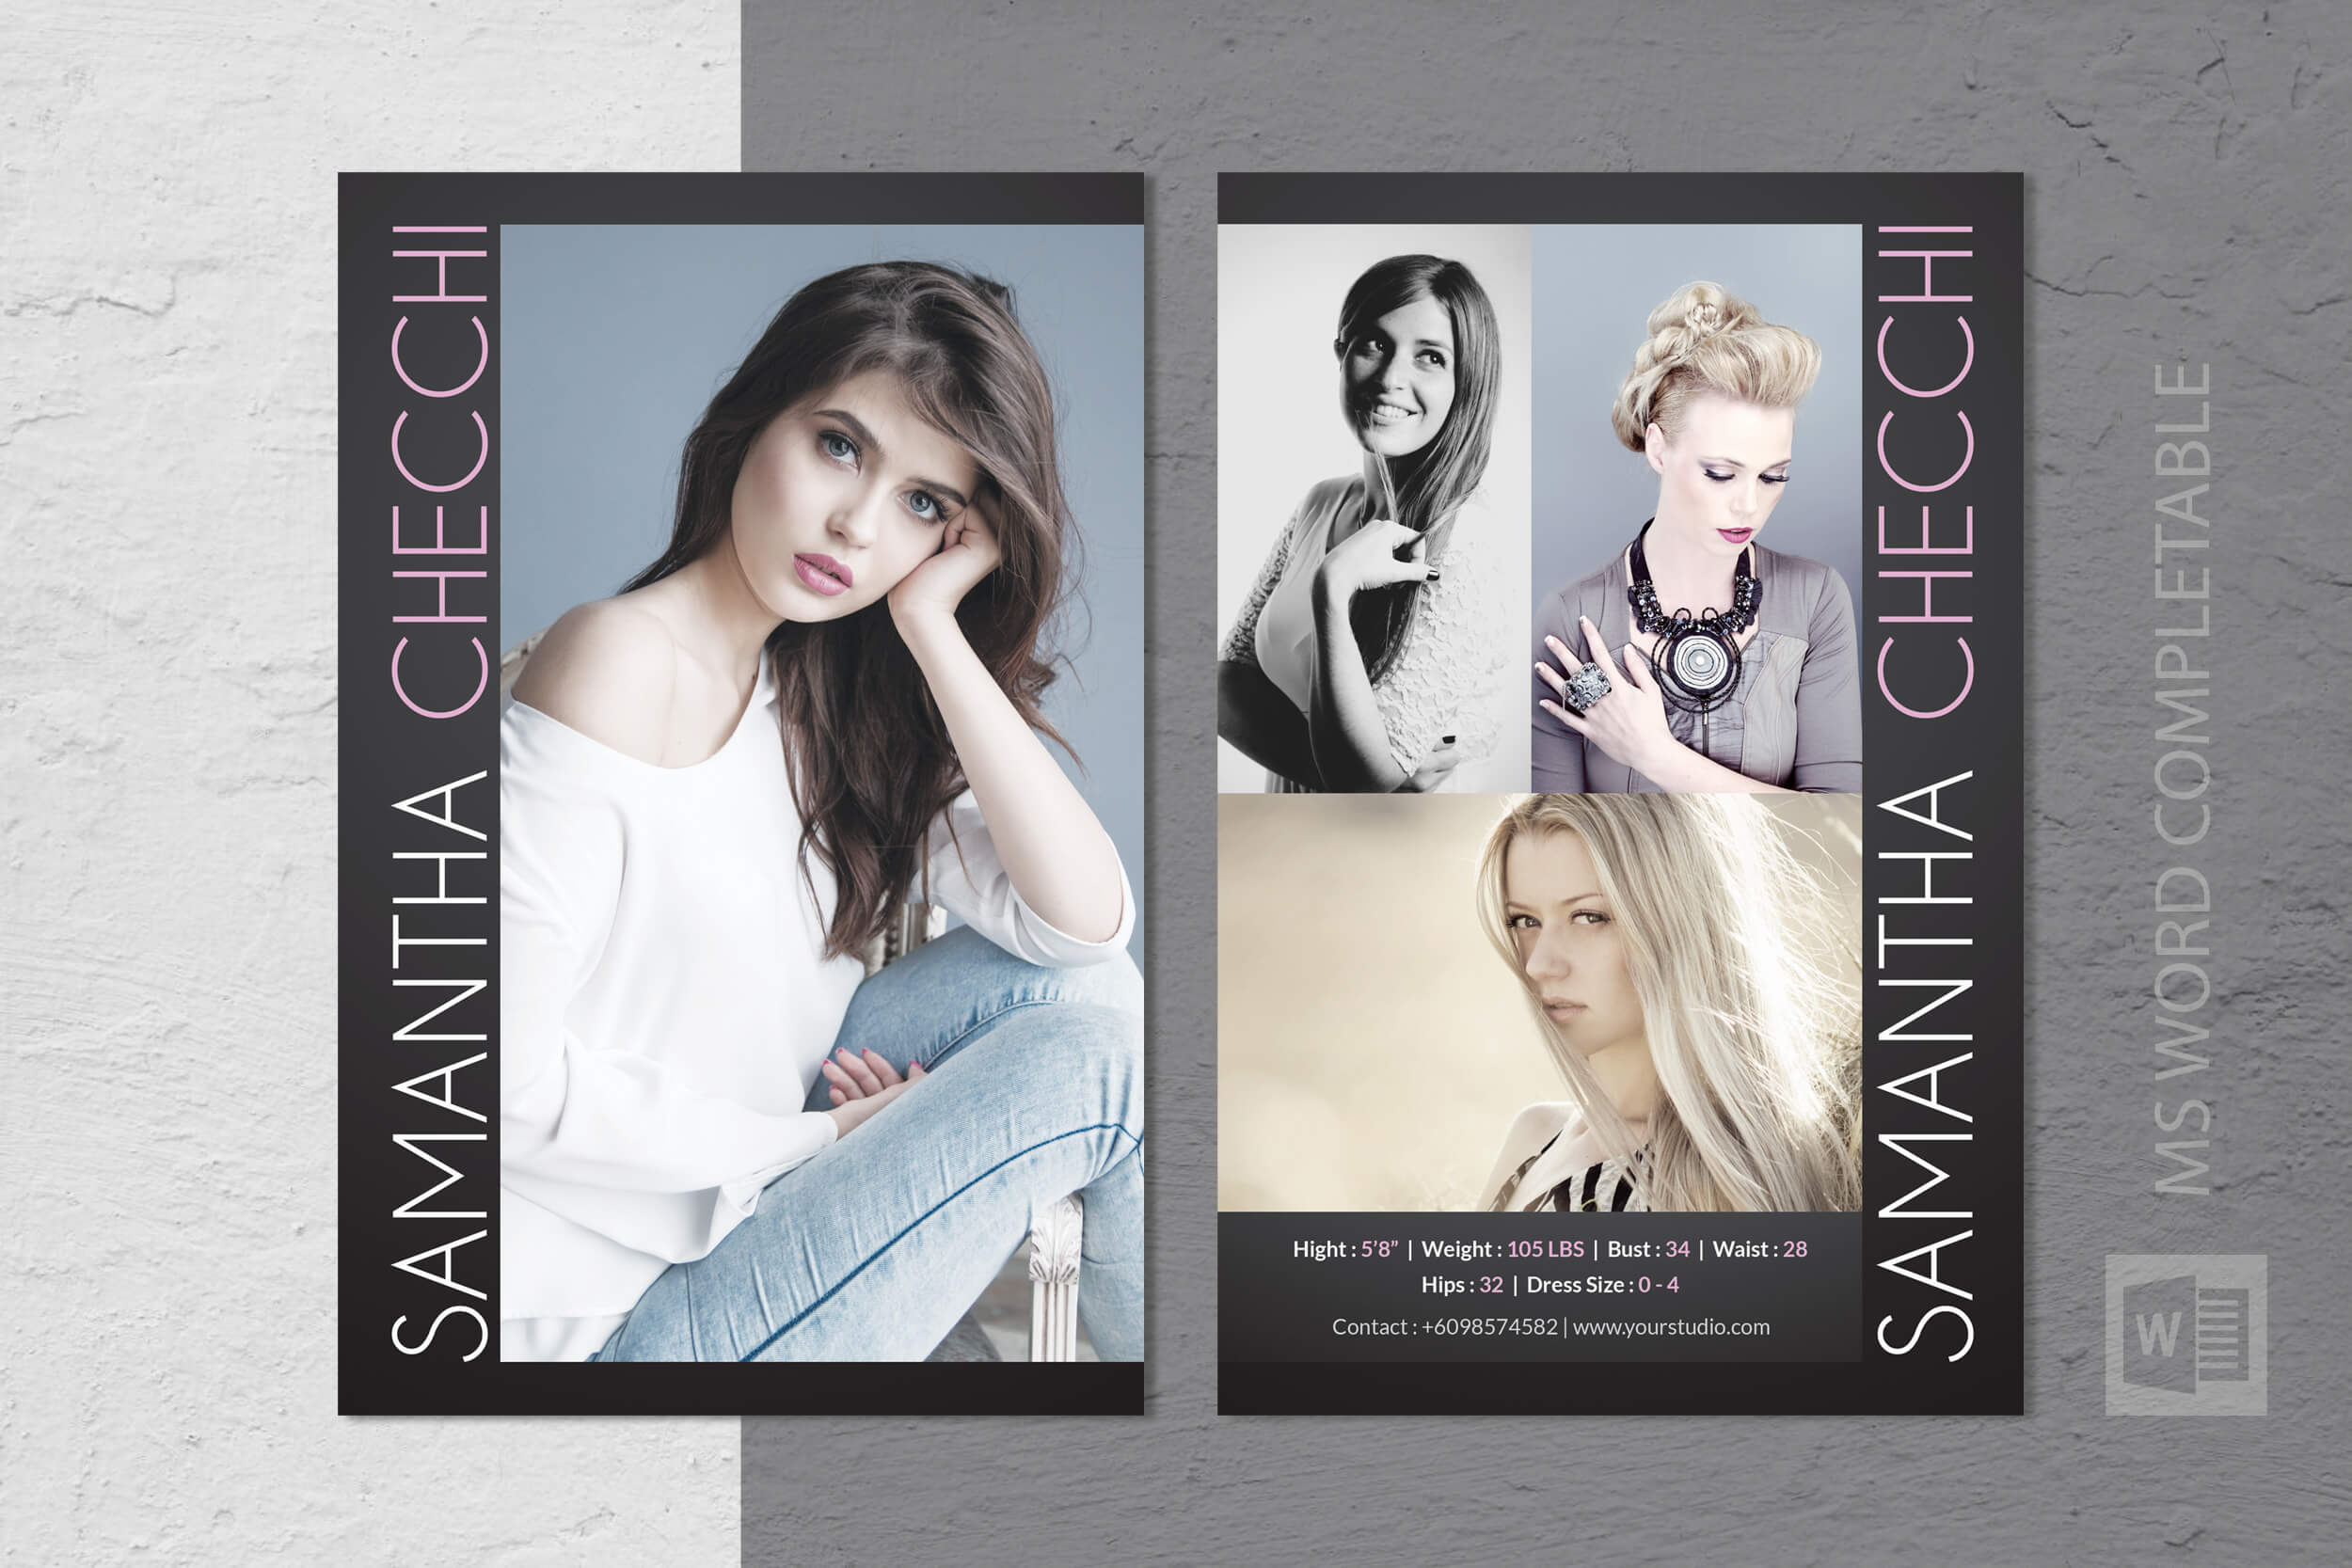 015 Model Comp Card Template Ideas Outstanding Psd Free Pertaining To Model Comp Card Template Free